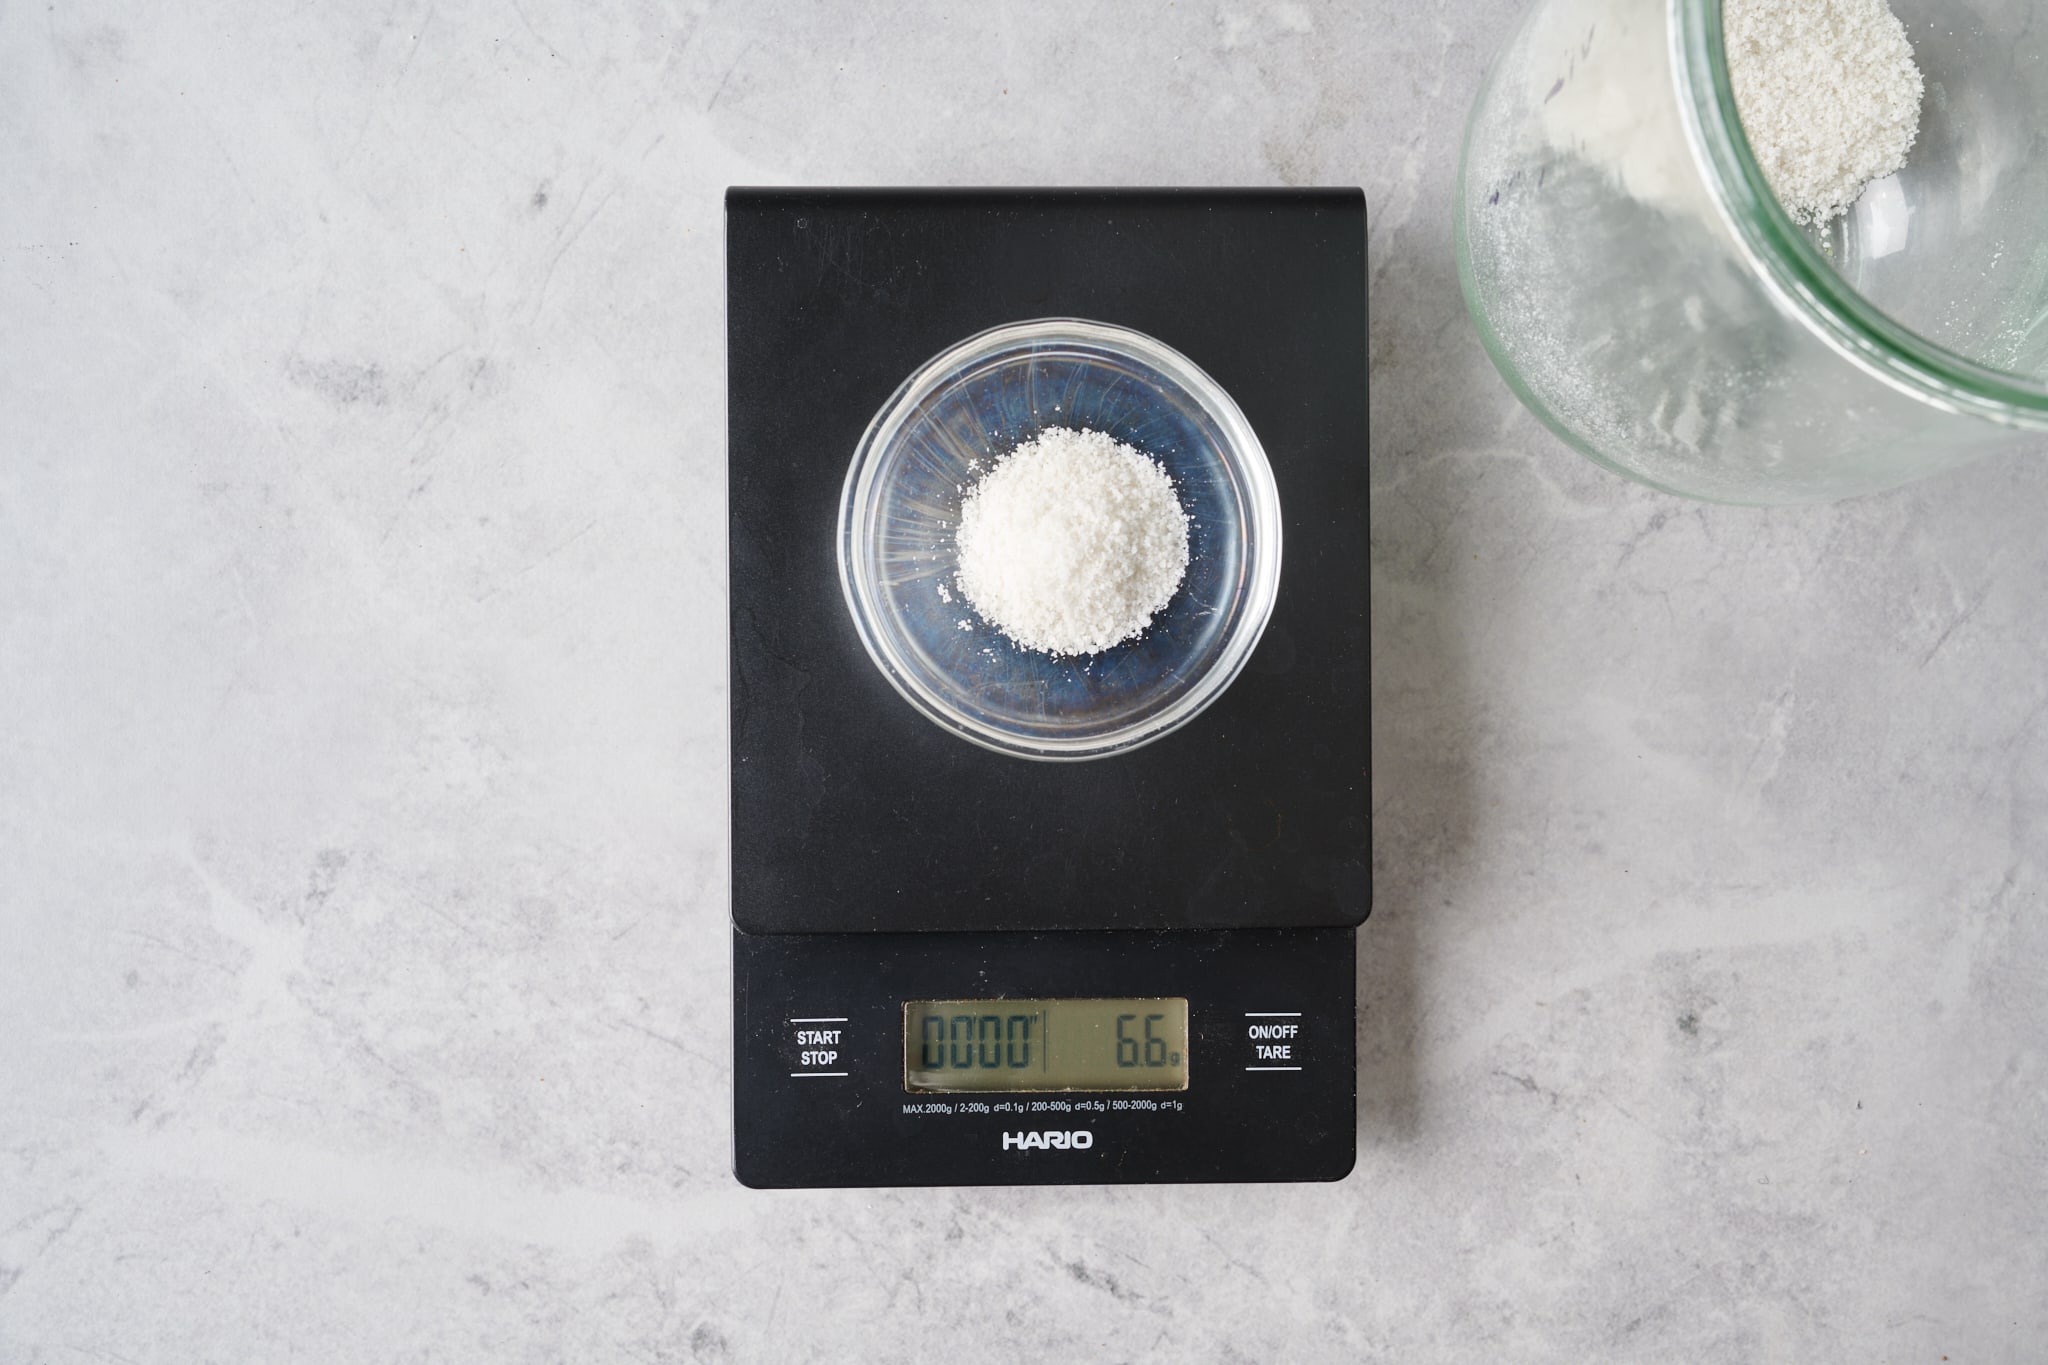 https://www.theperfectloaf.com/wp-content/uploads/2023/01/theperfectloaf_best_kitchen_scale_for_making_bread_hario_scale.jpg